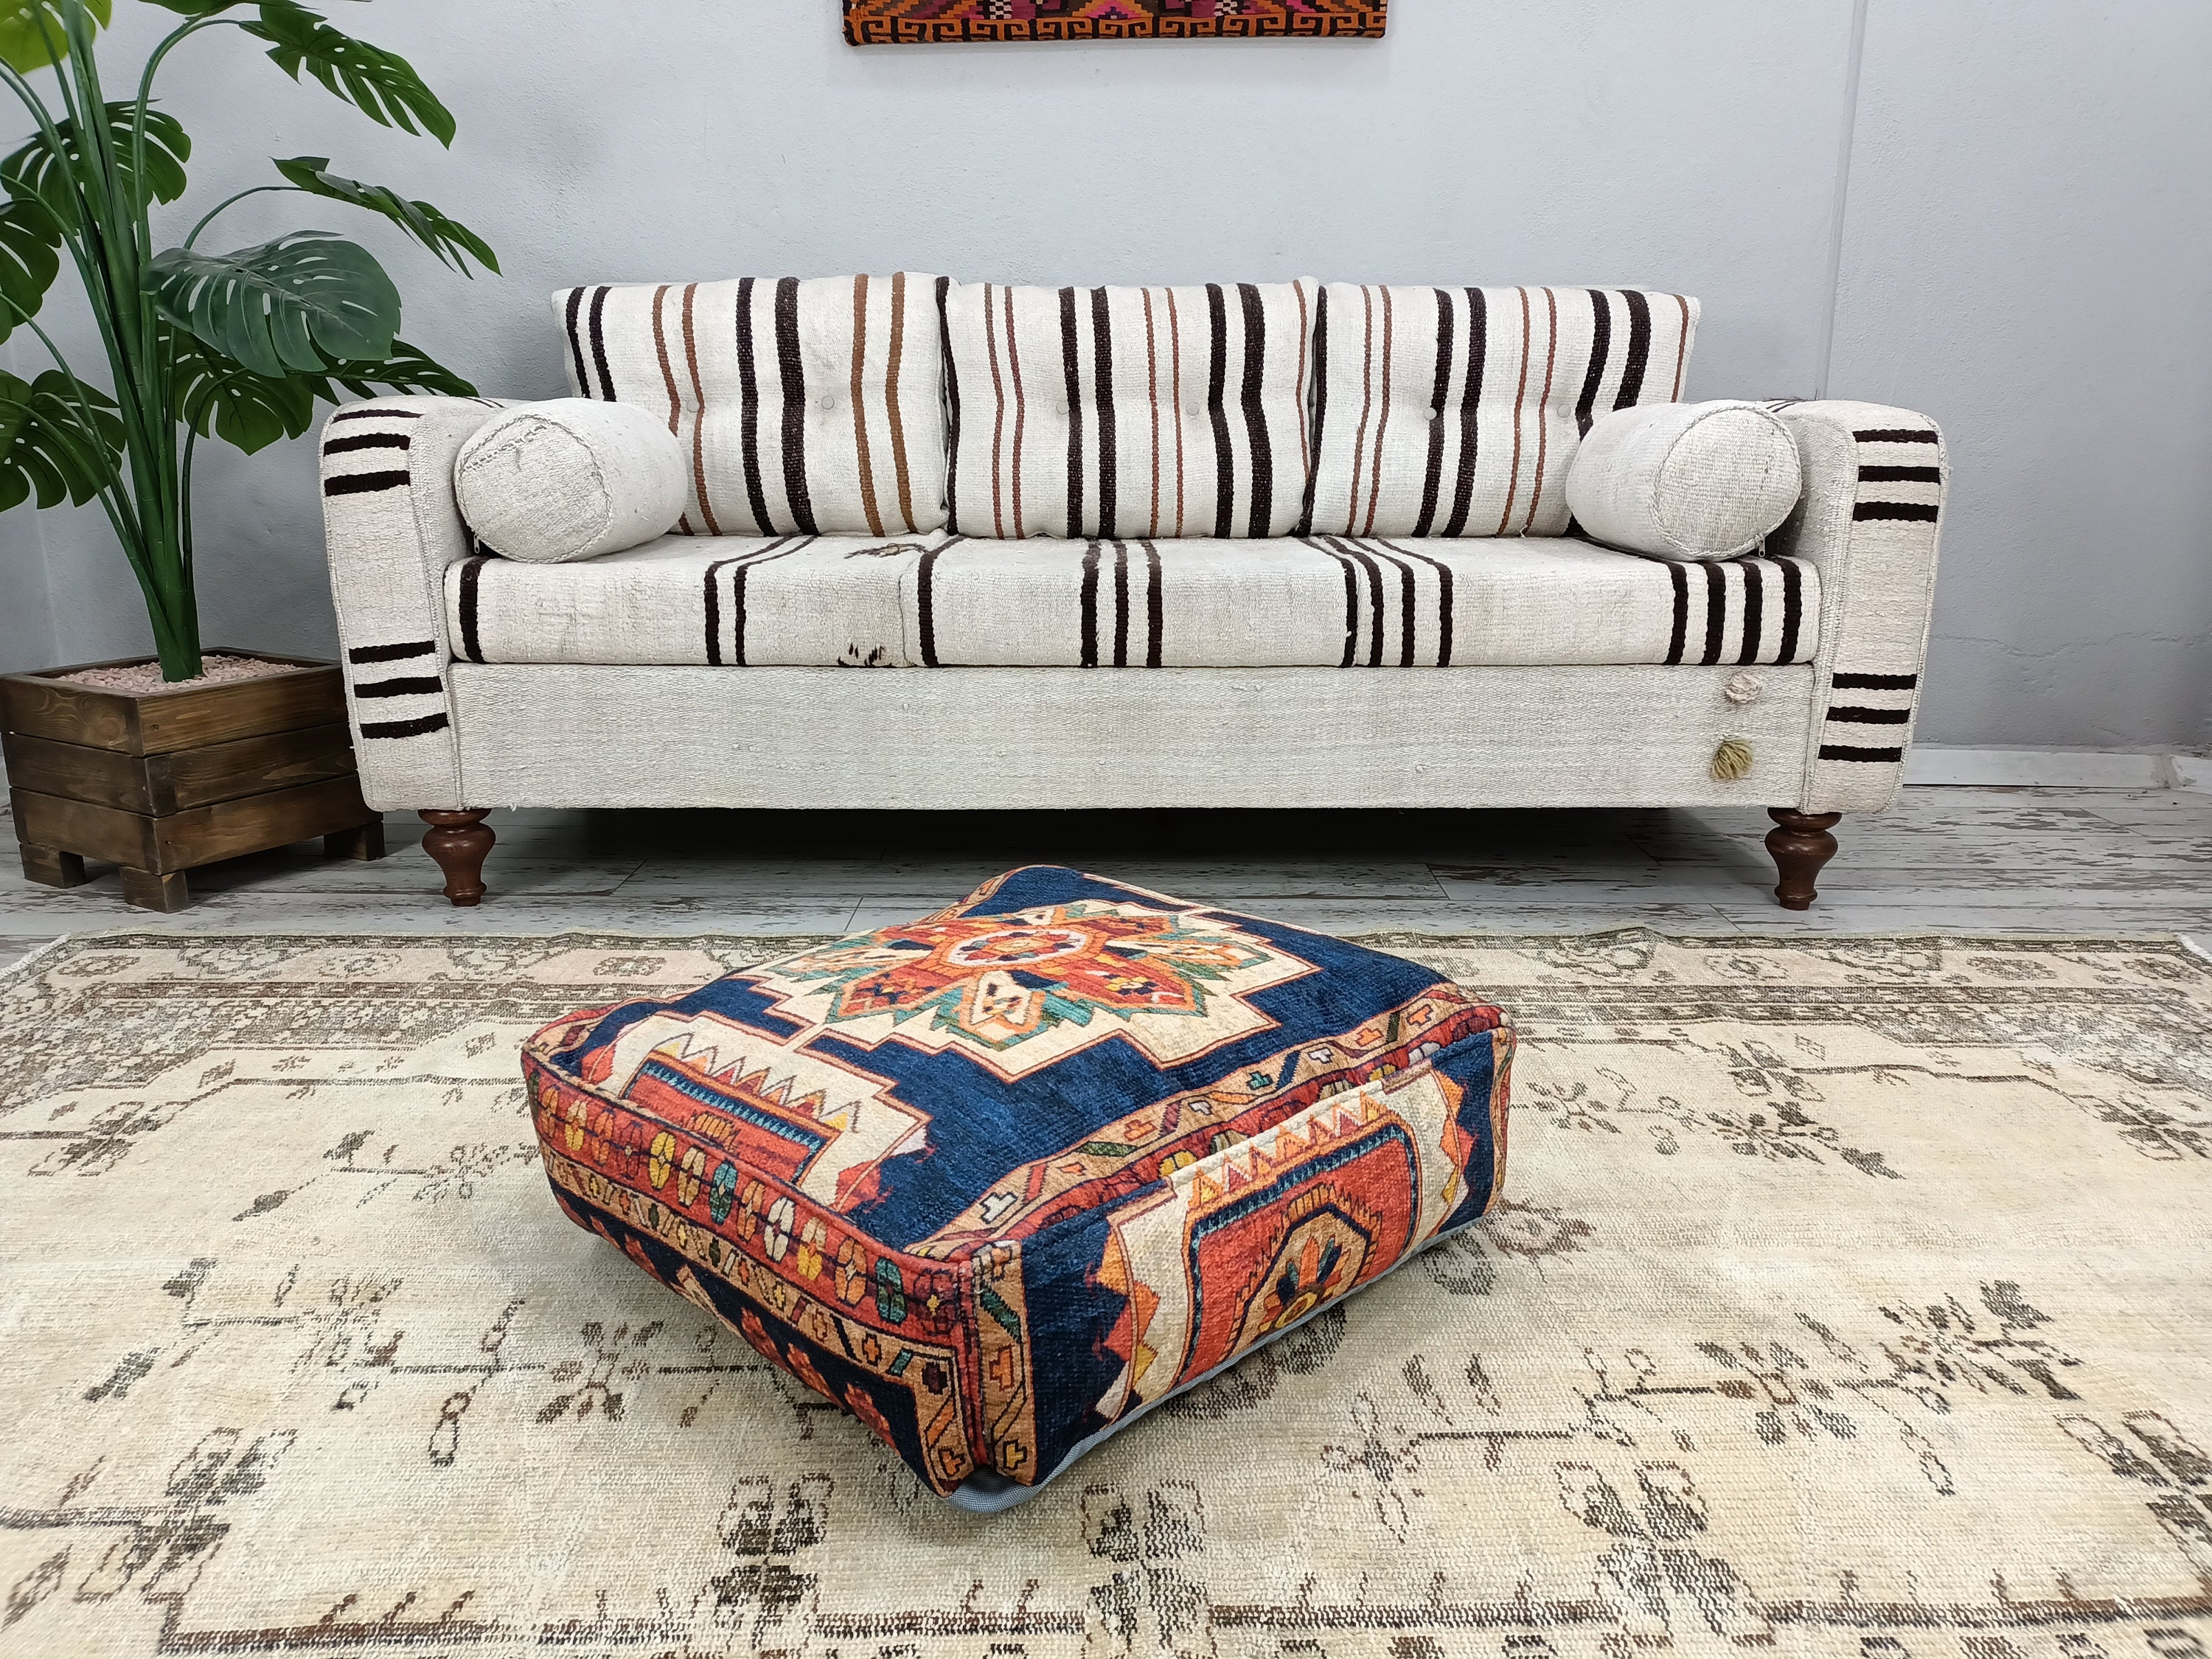 Large Persian Balouch and Leather Floor Cushion - Lawton Mull